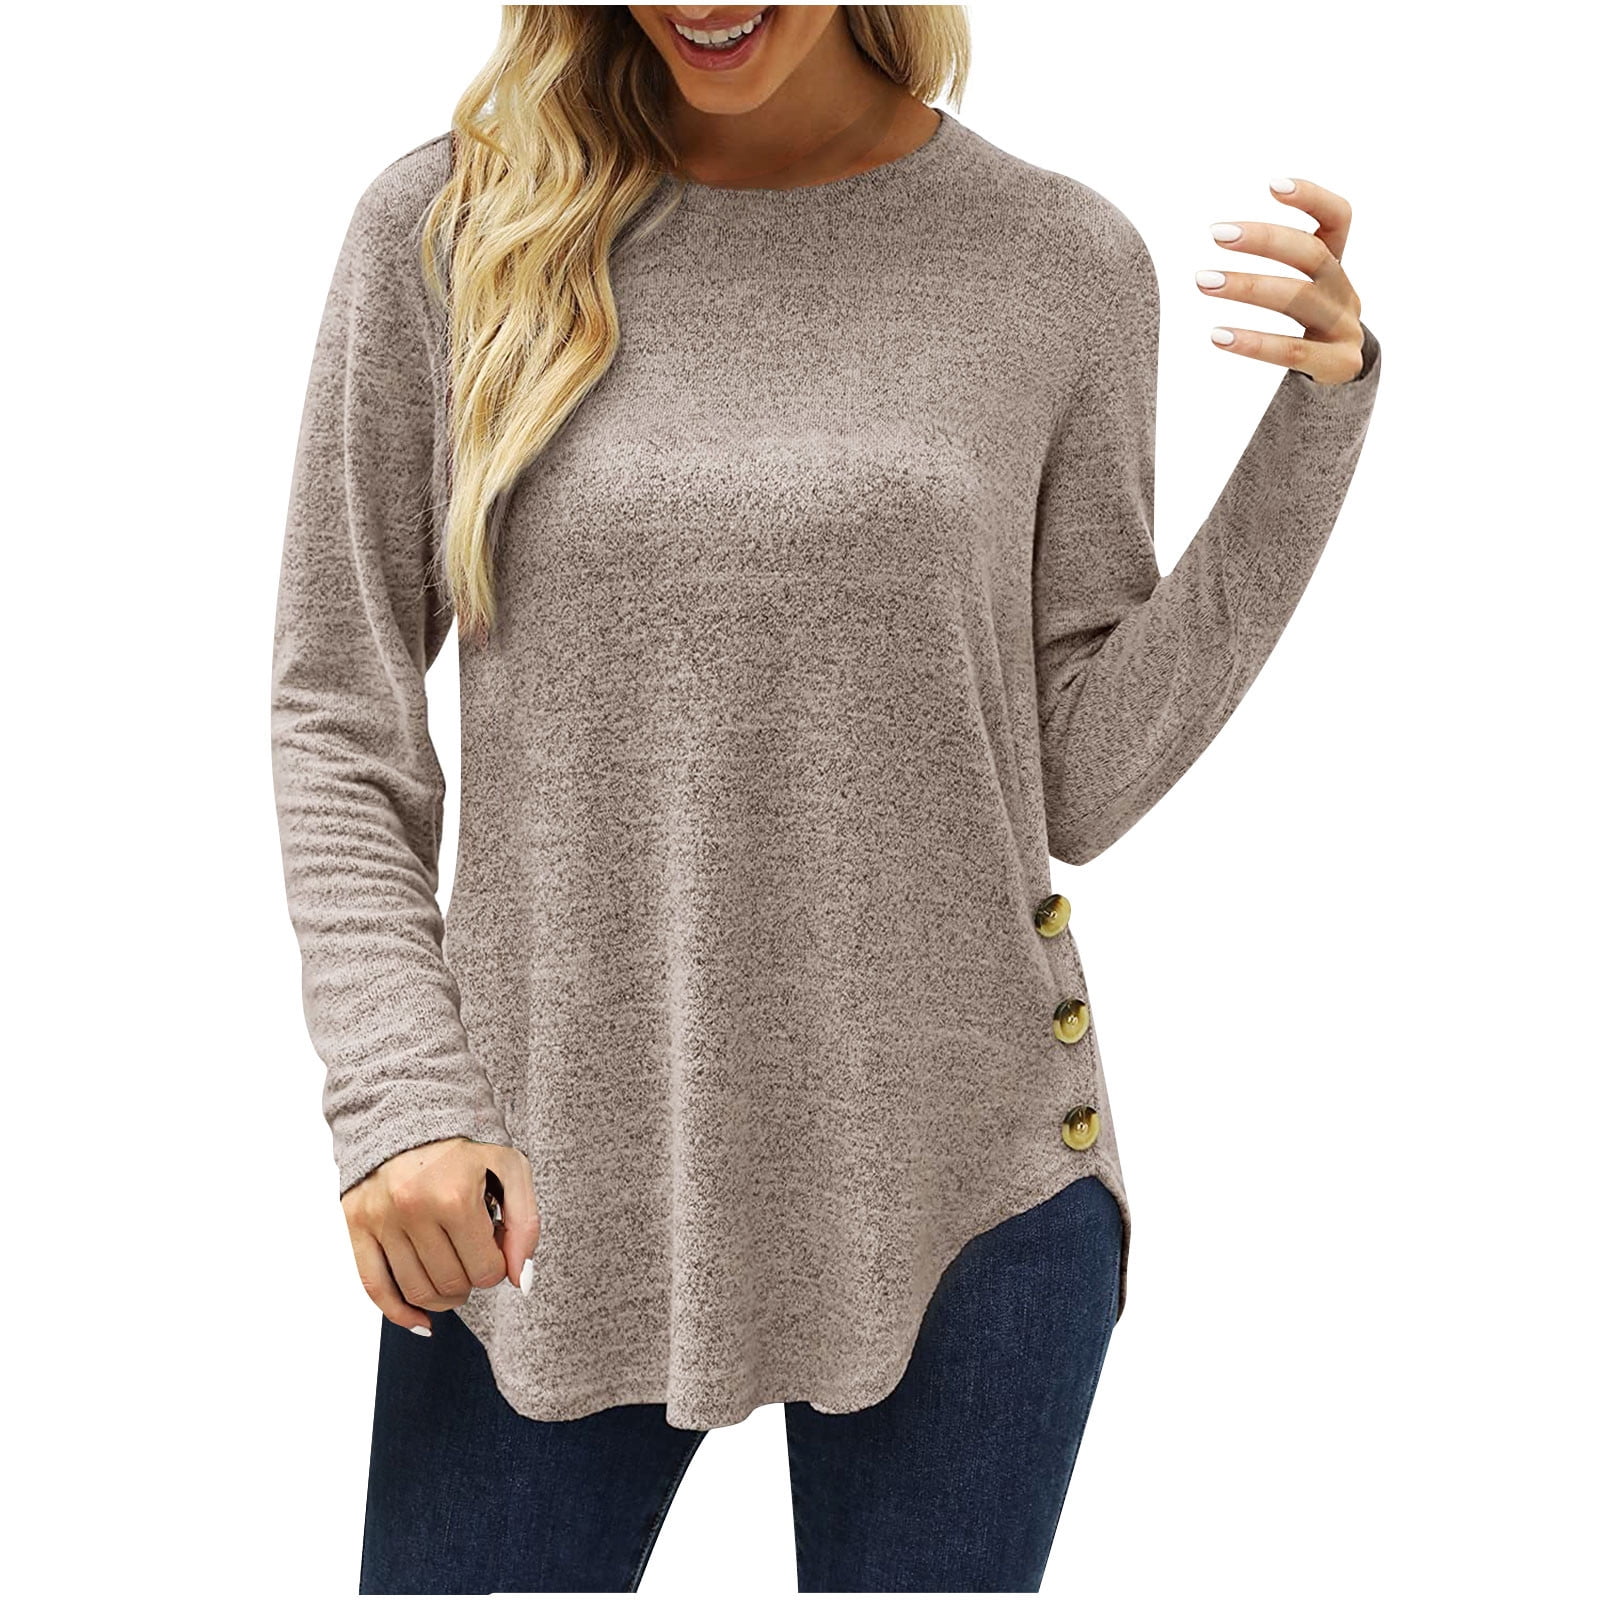 Hfyihgf Long Sleeve Shirts for Women Casual Loose Pullover Sweaters ...